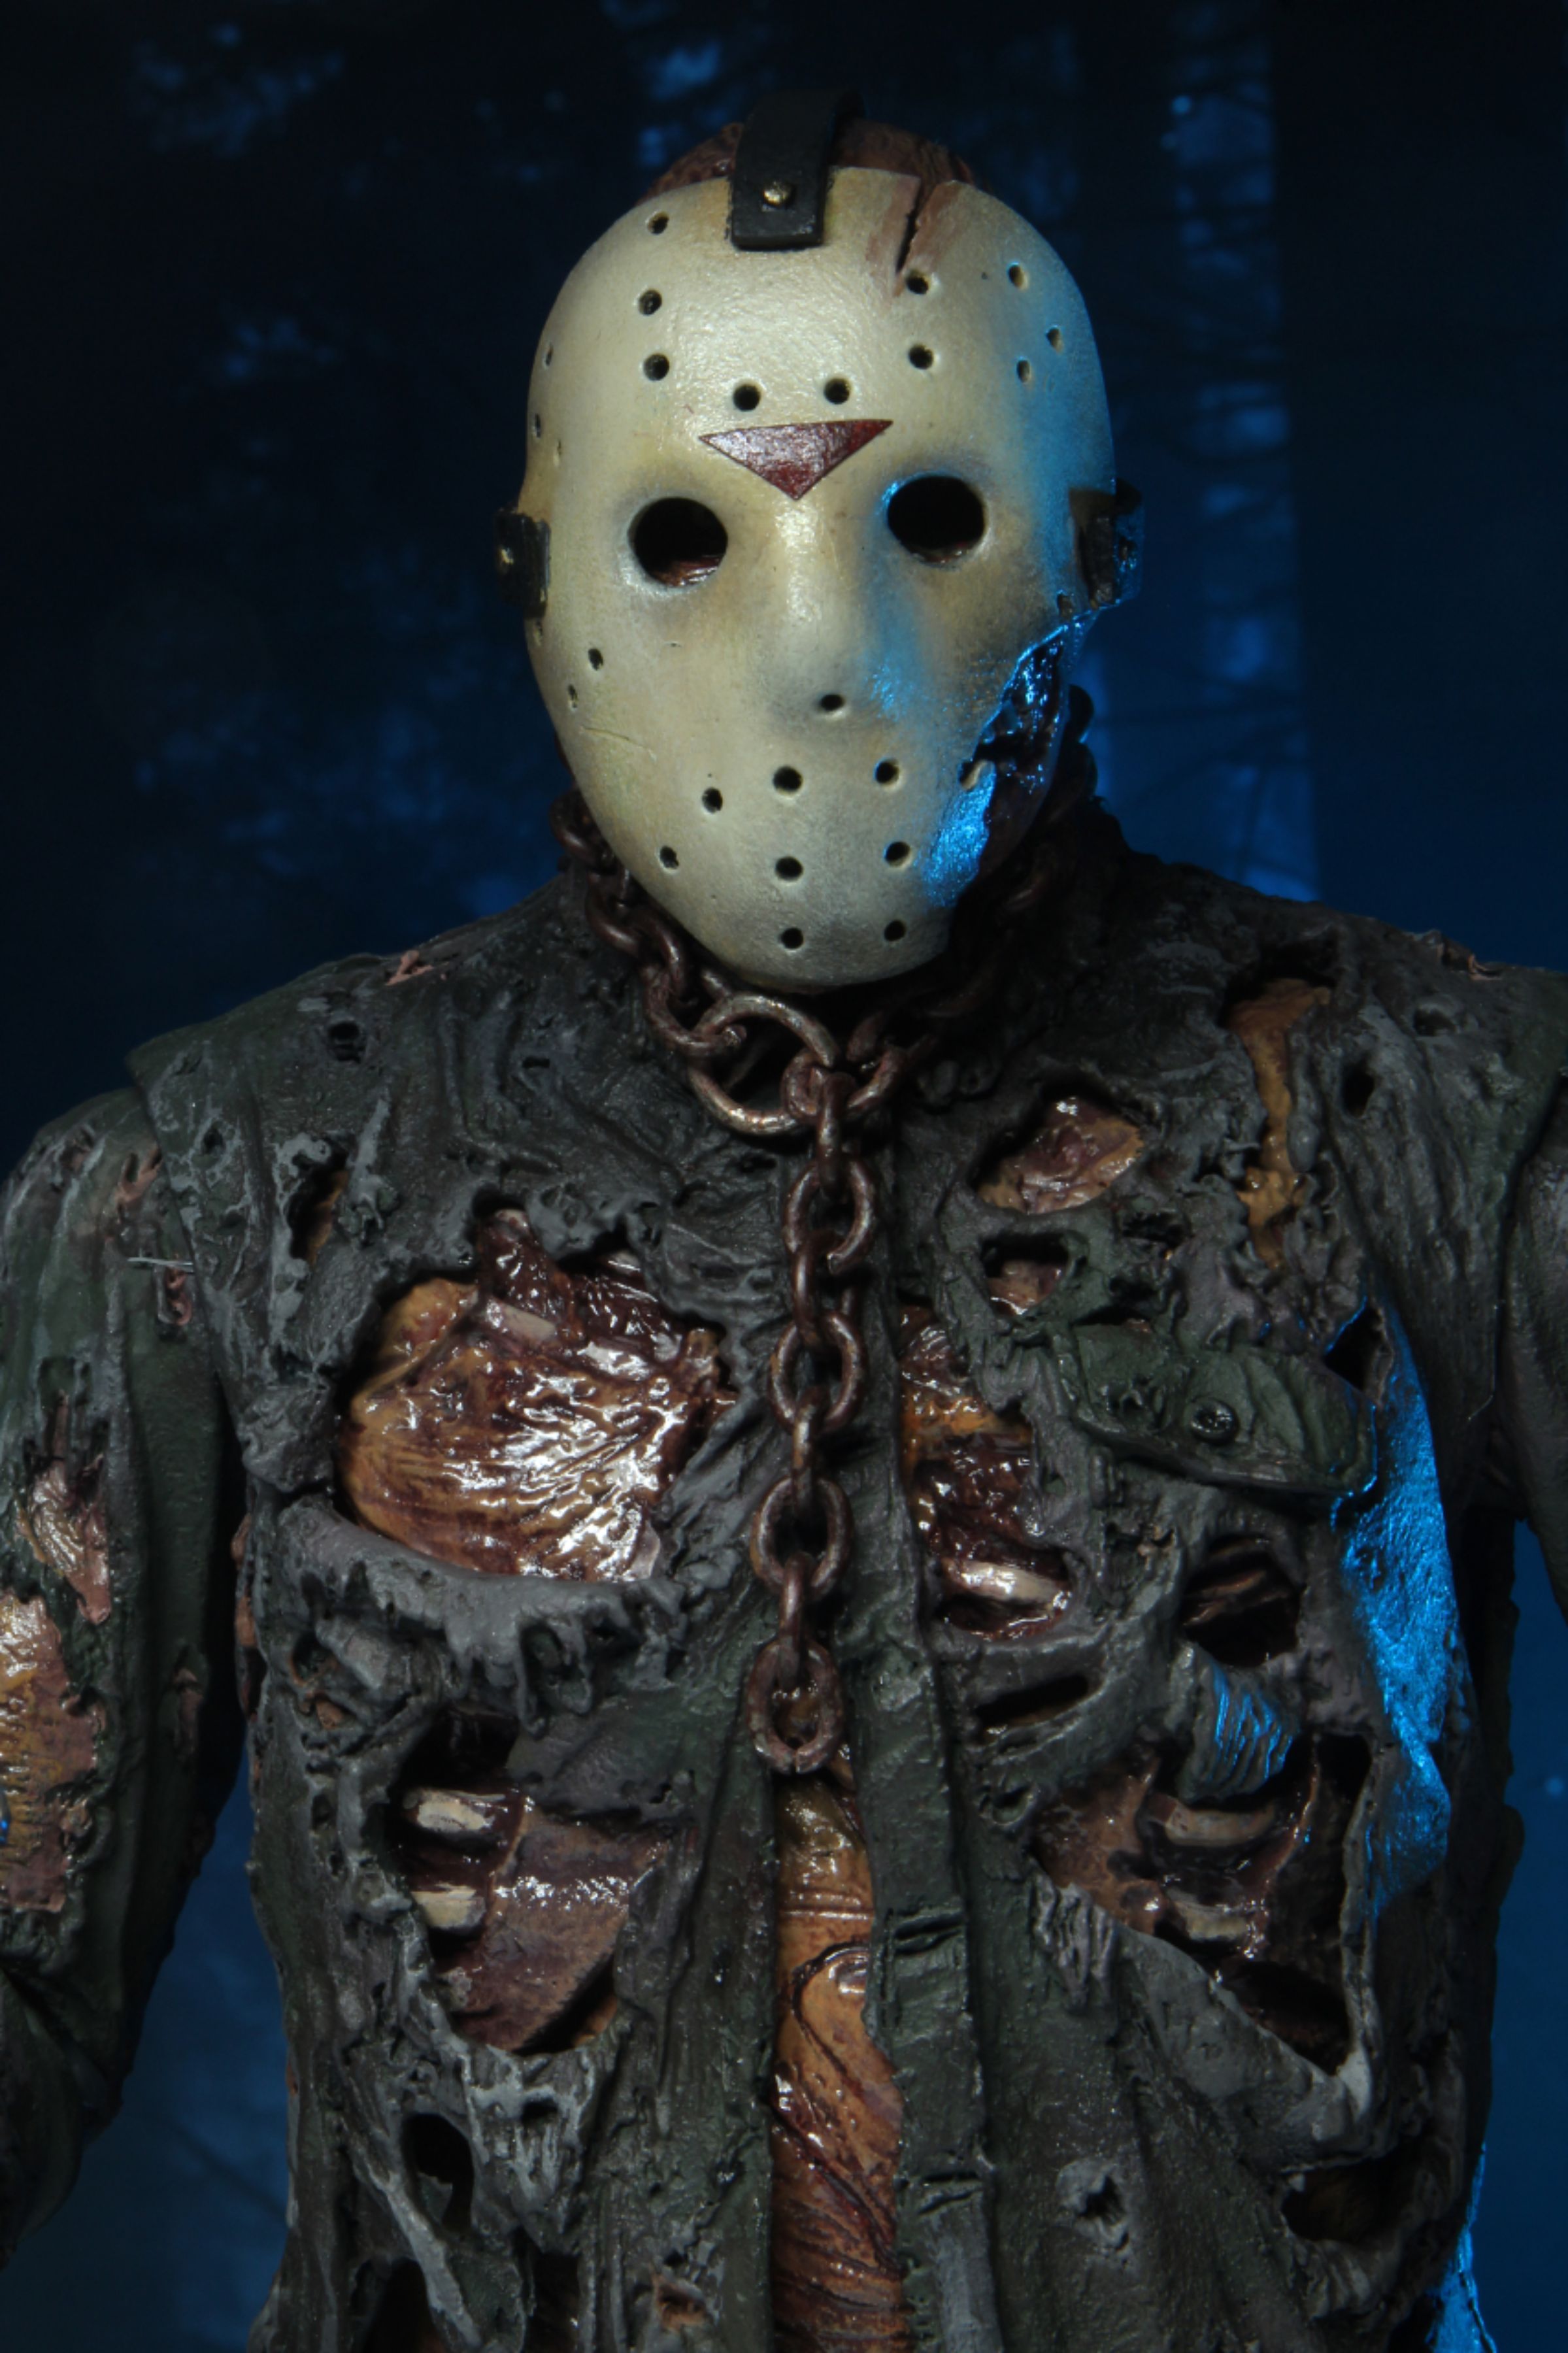 NECA Friday the 13th Ultimate Part 6 Jason Voorhees 7” Scale Action Figure